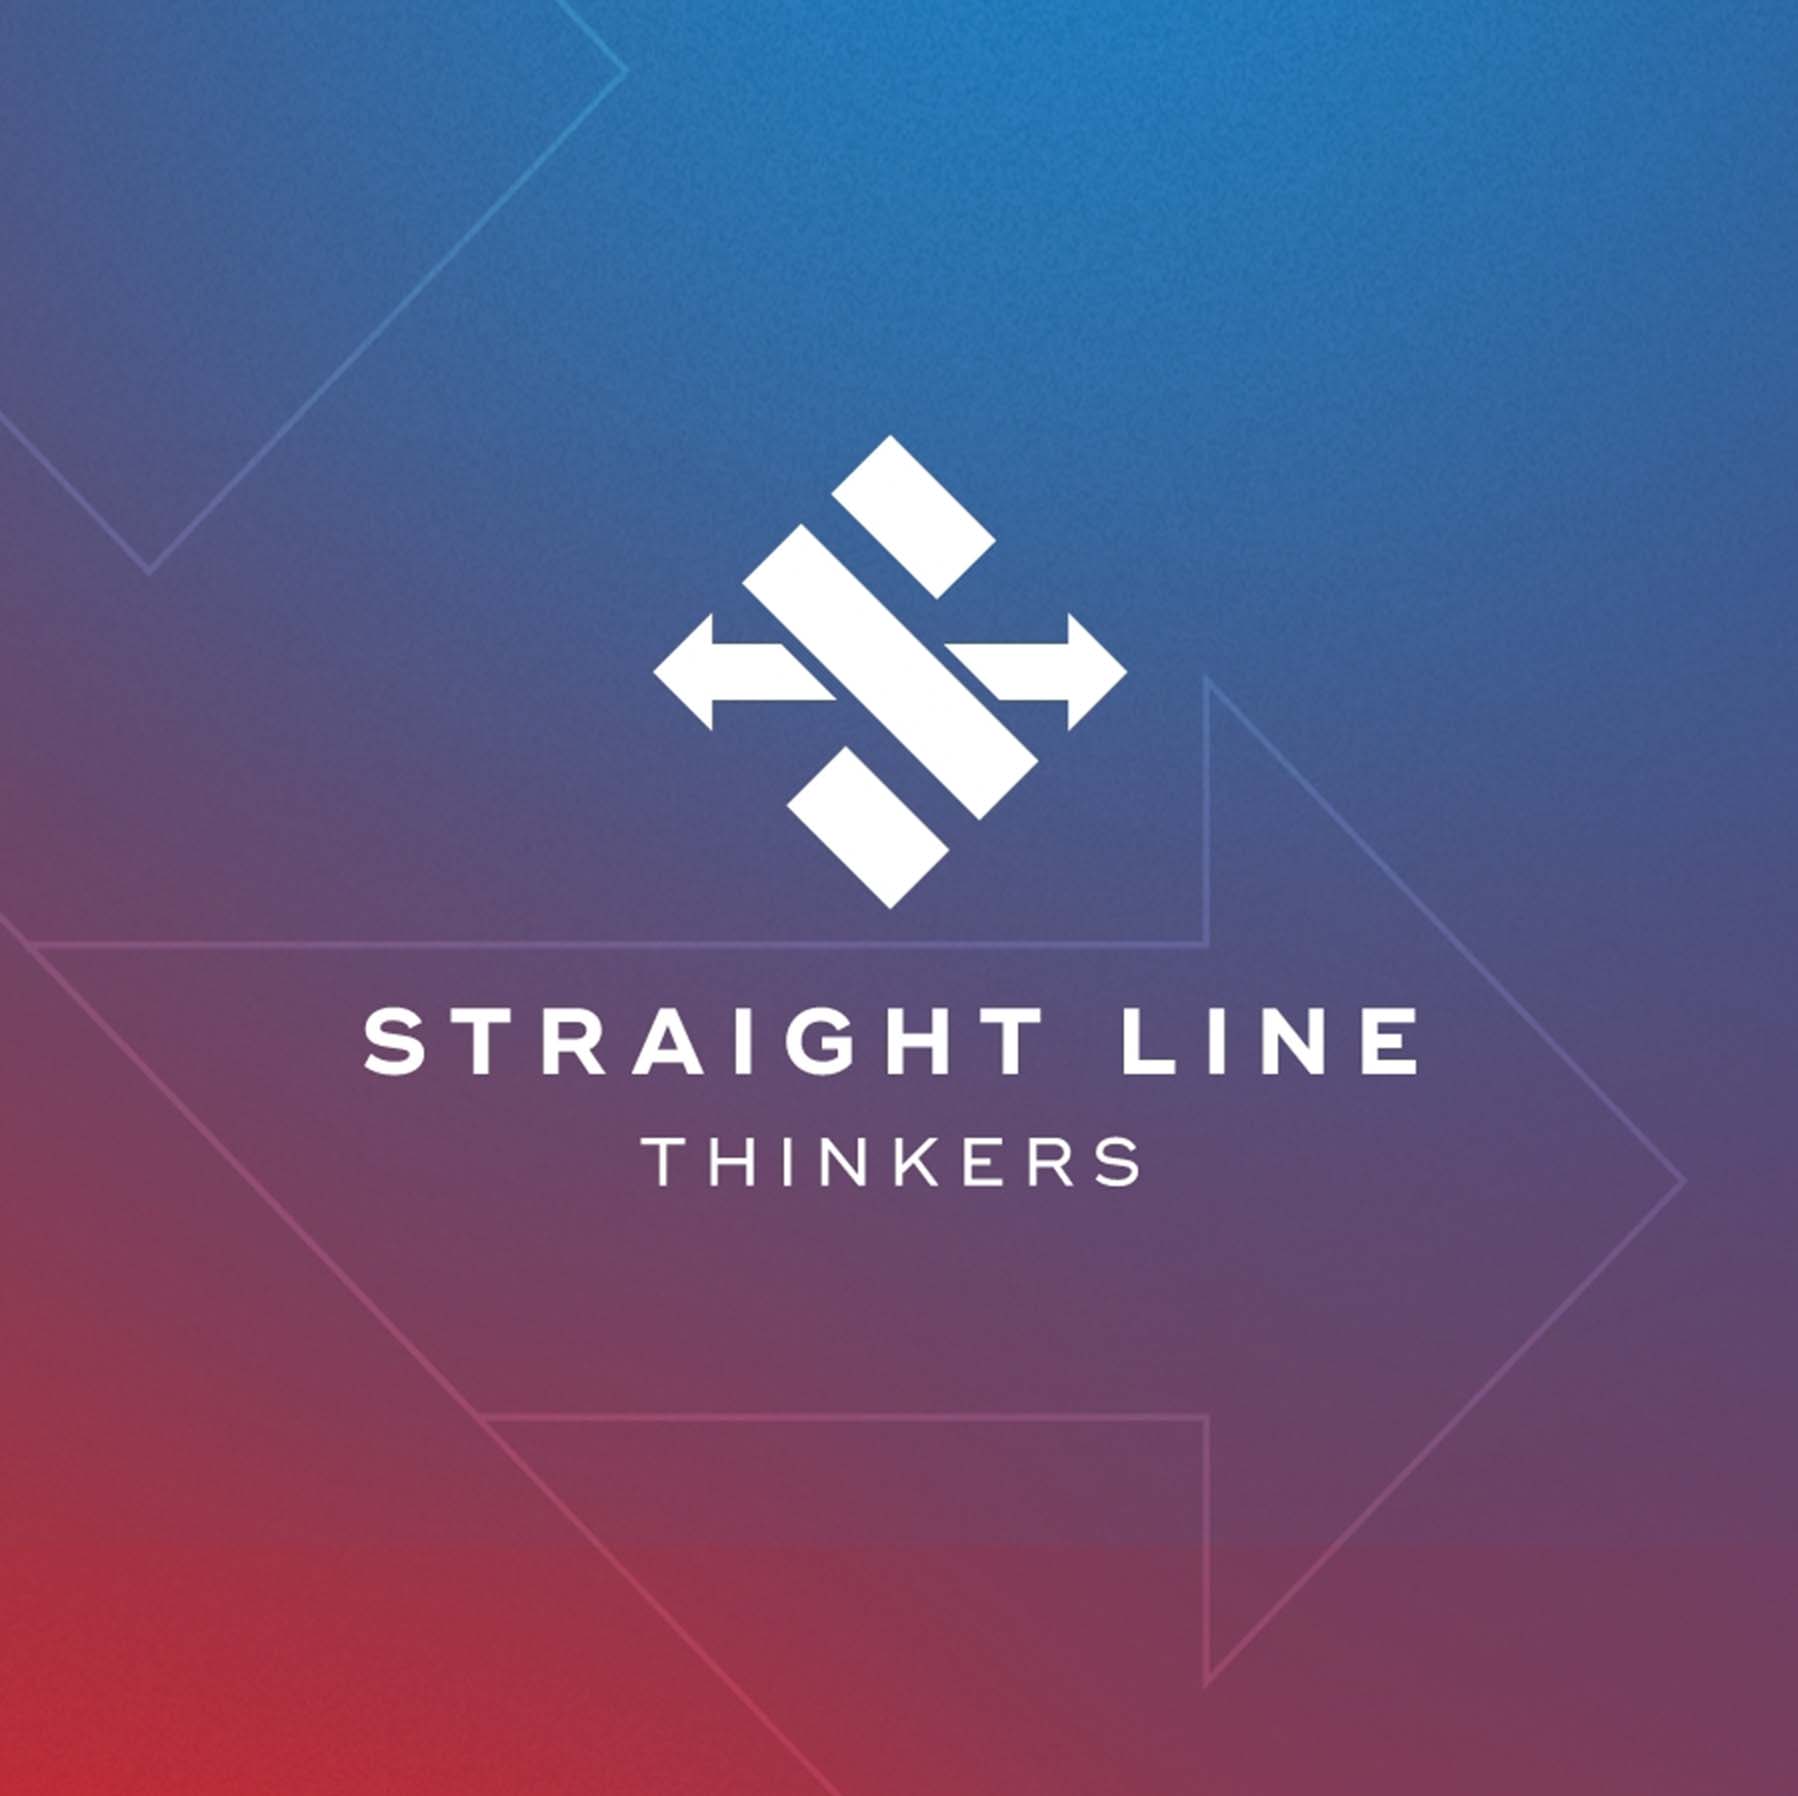 Straight-line thinking shows you the way to go